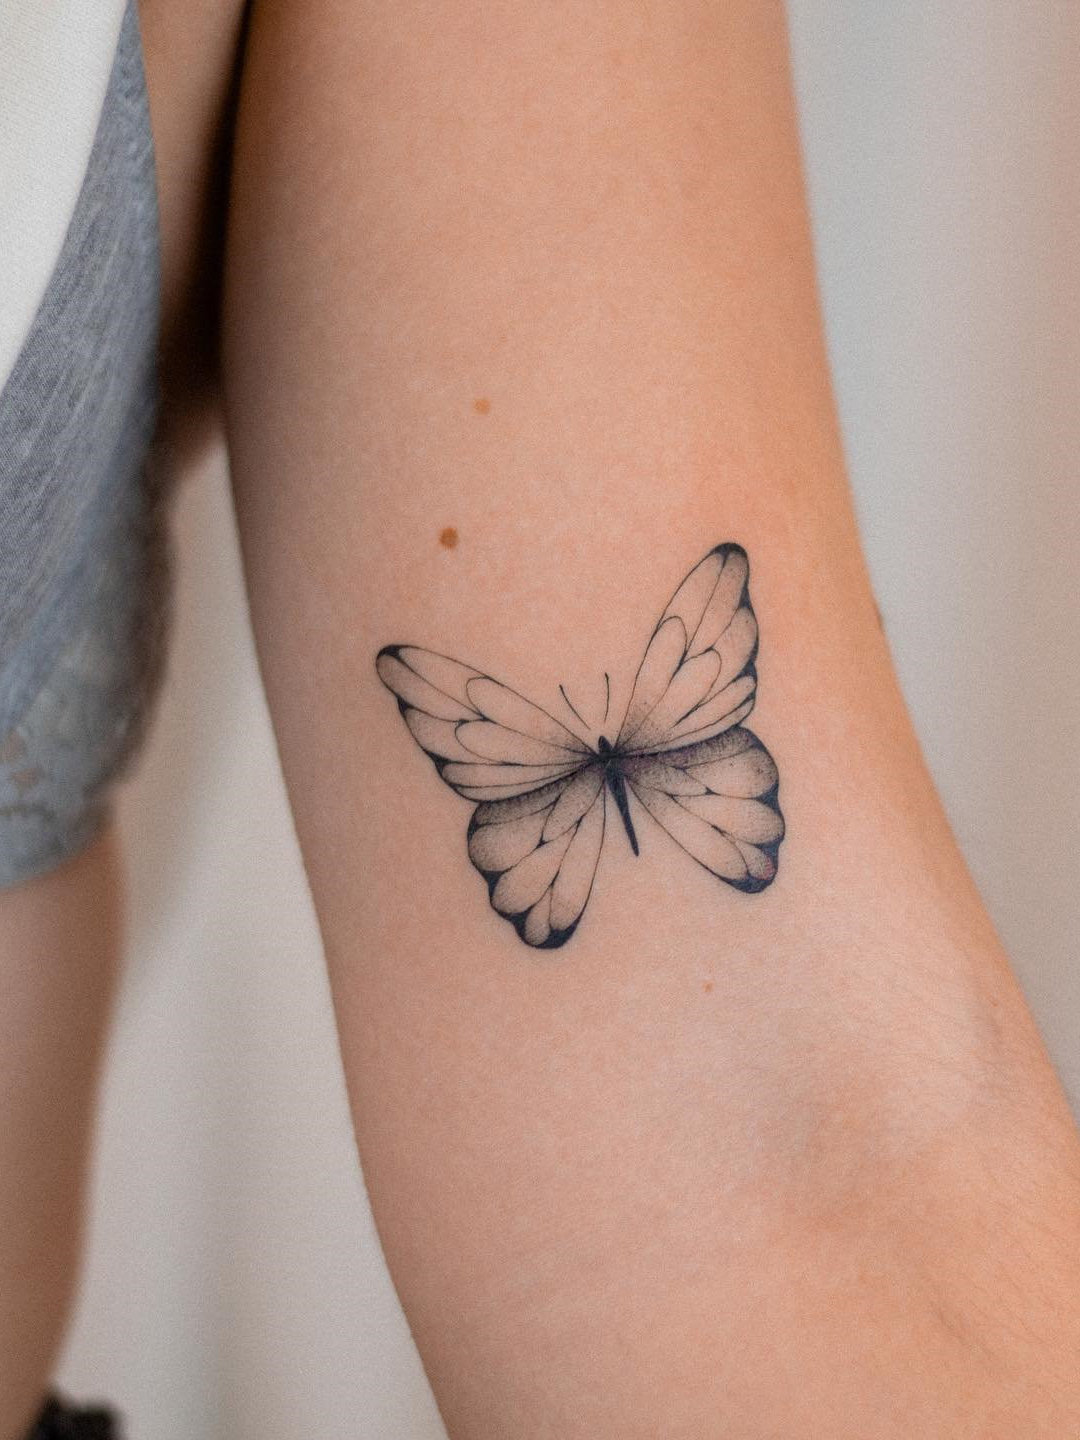 Inner Arm Tattoos for Females, butterfly tattoo ideas